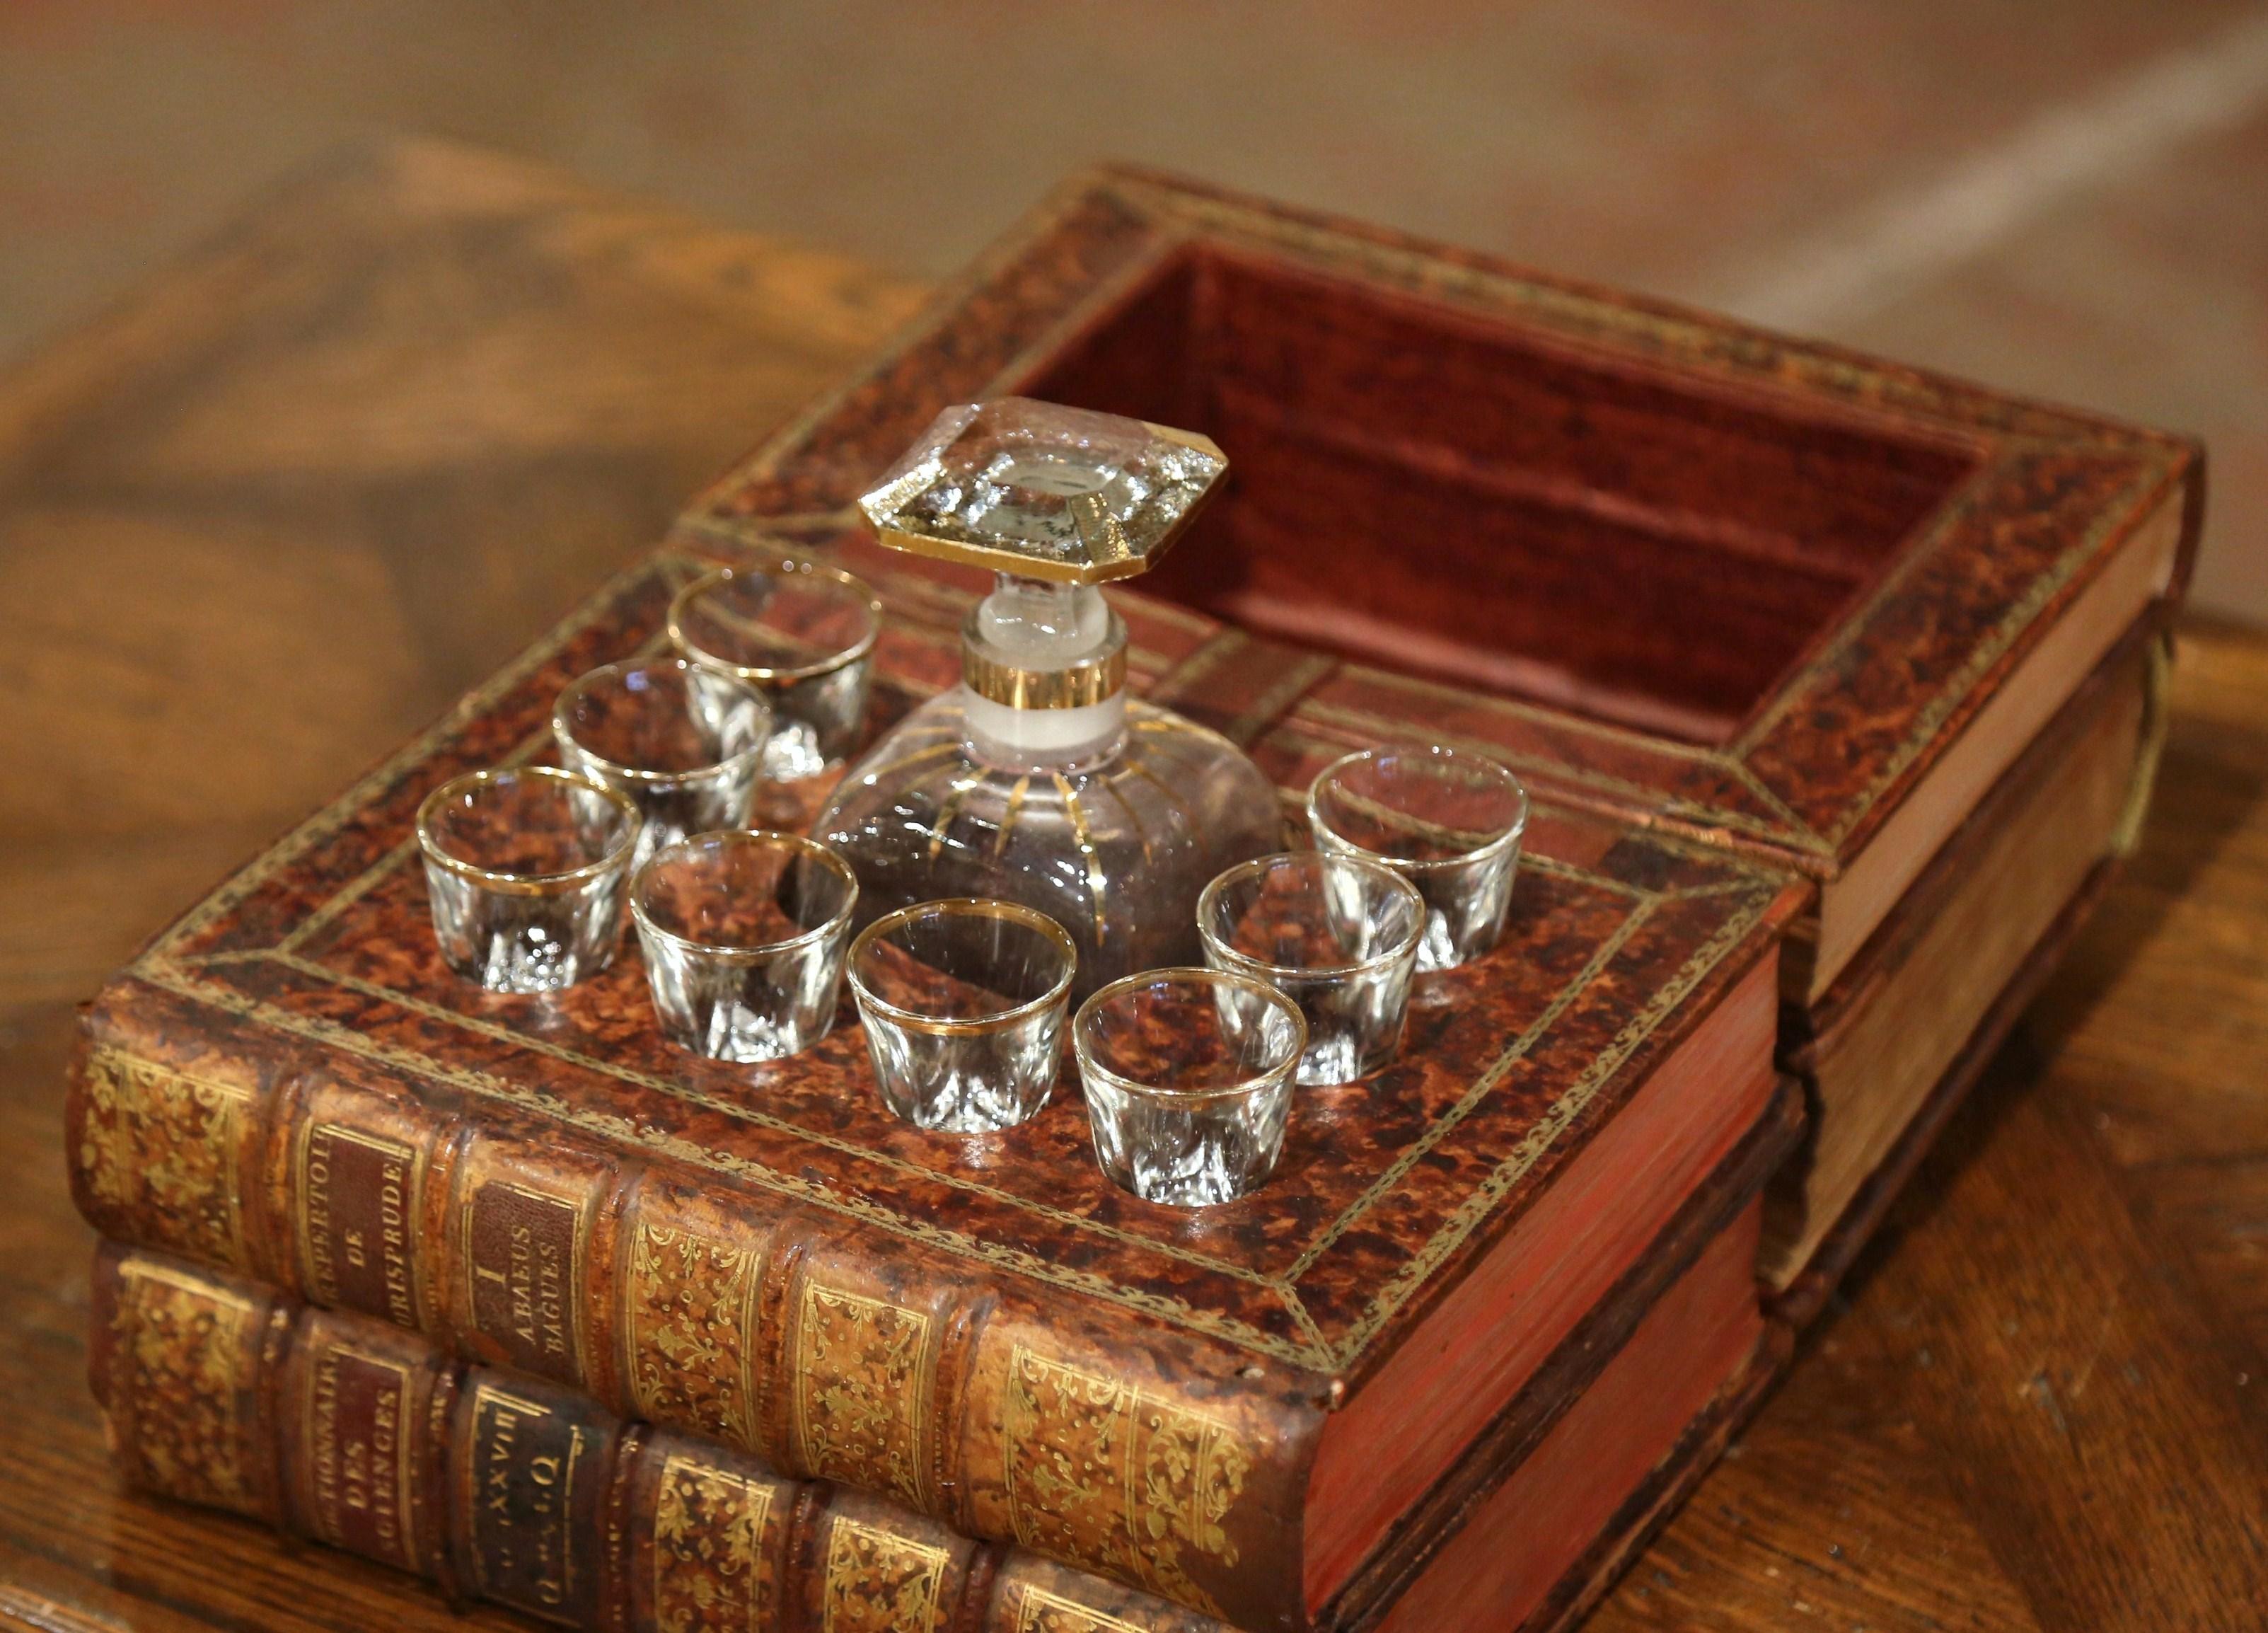 Gilt 19th Century French Leather-Bound Book Liquor Box with 8 Shot Glasses and Carafe